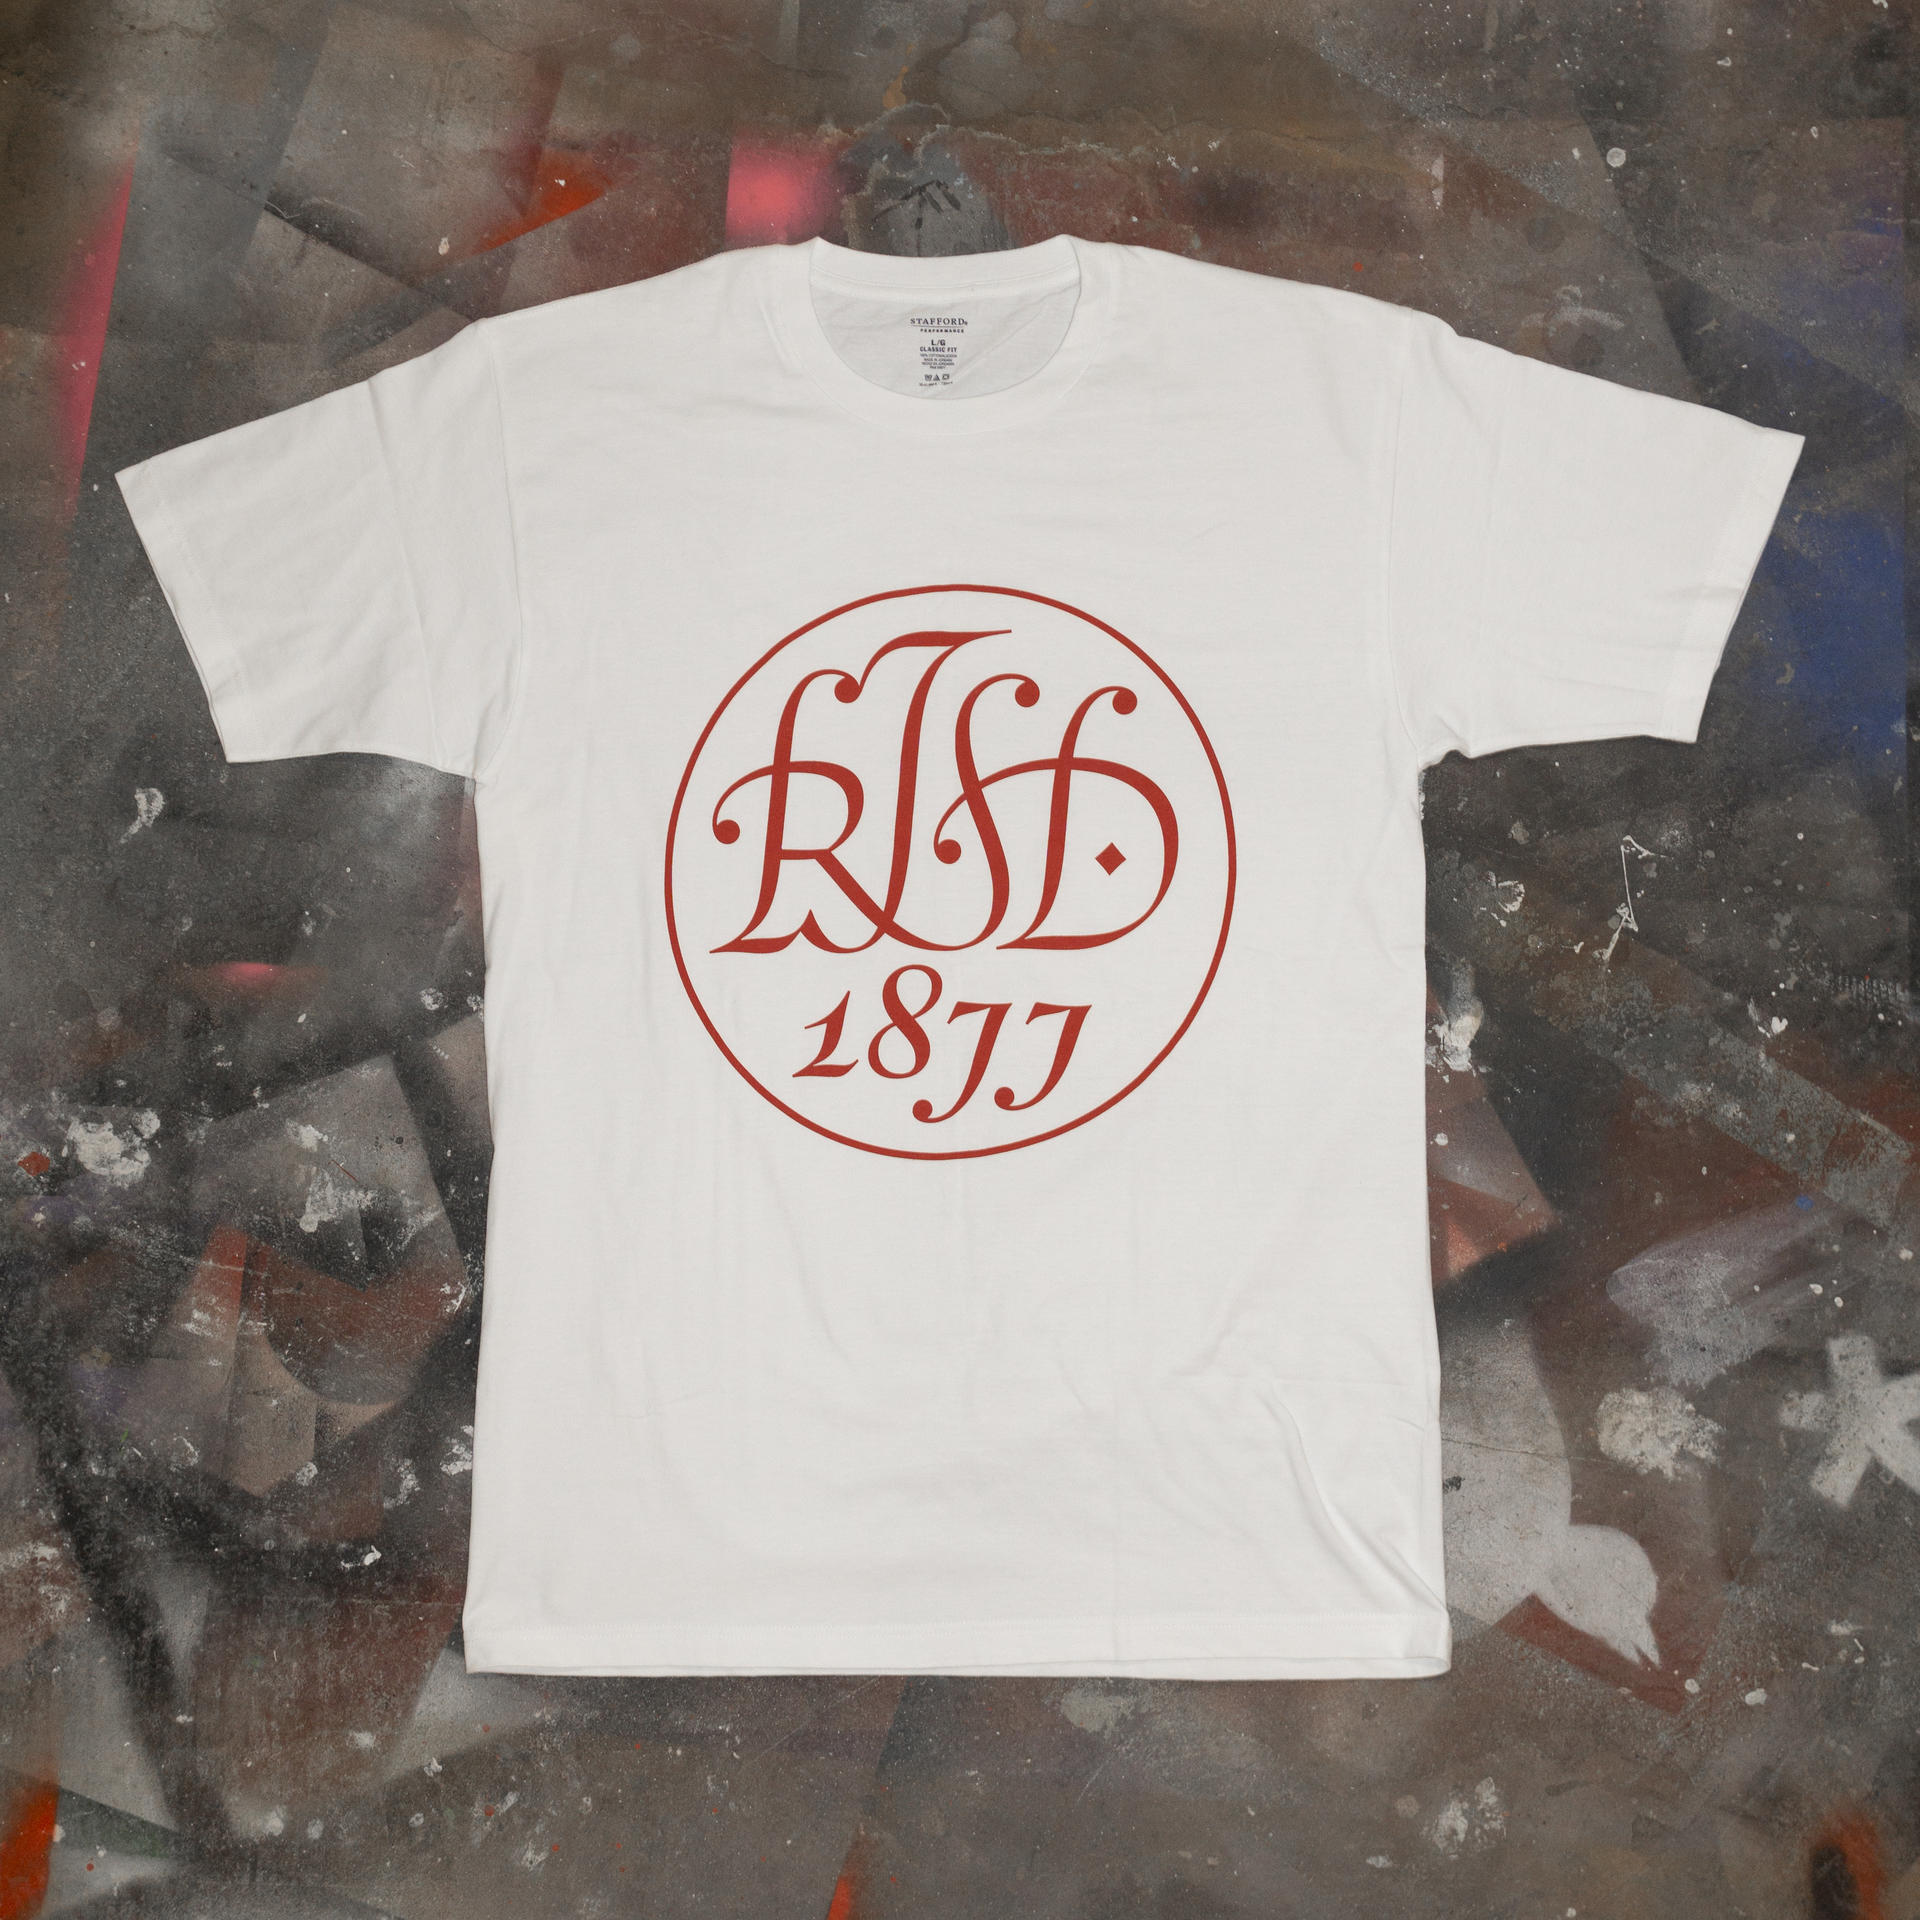 T-shirt design with a holiday version of the original "RISD 1877" seal designed by John Howard Benson